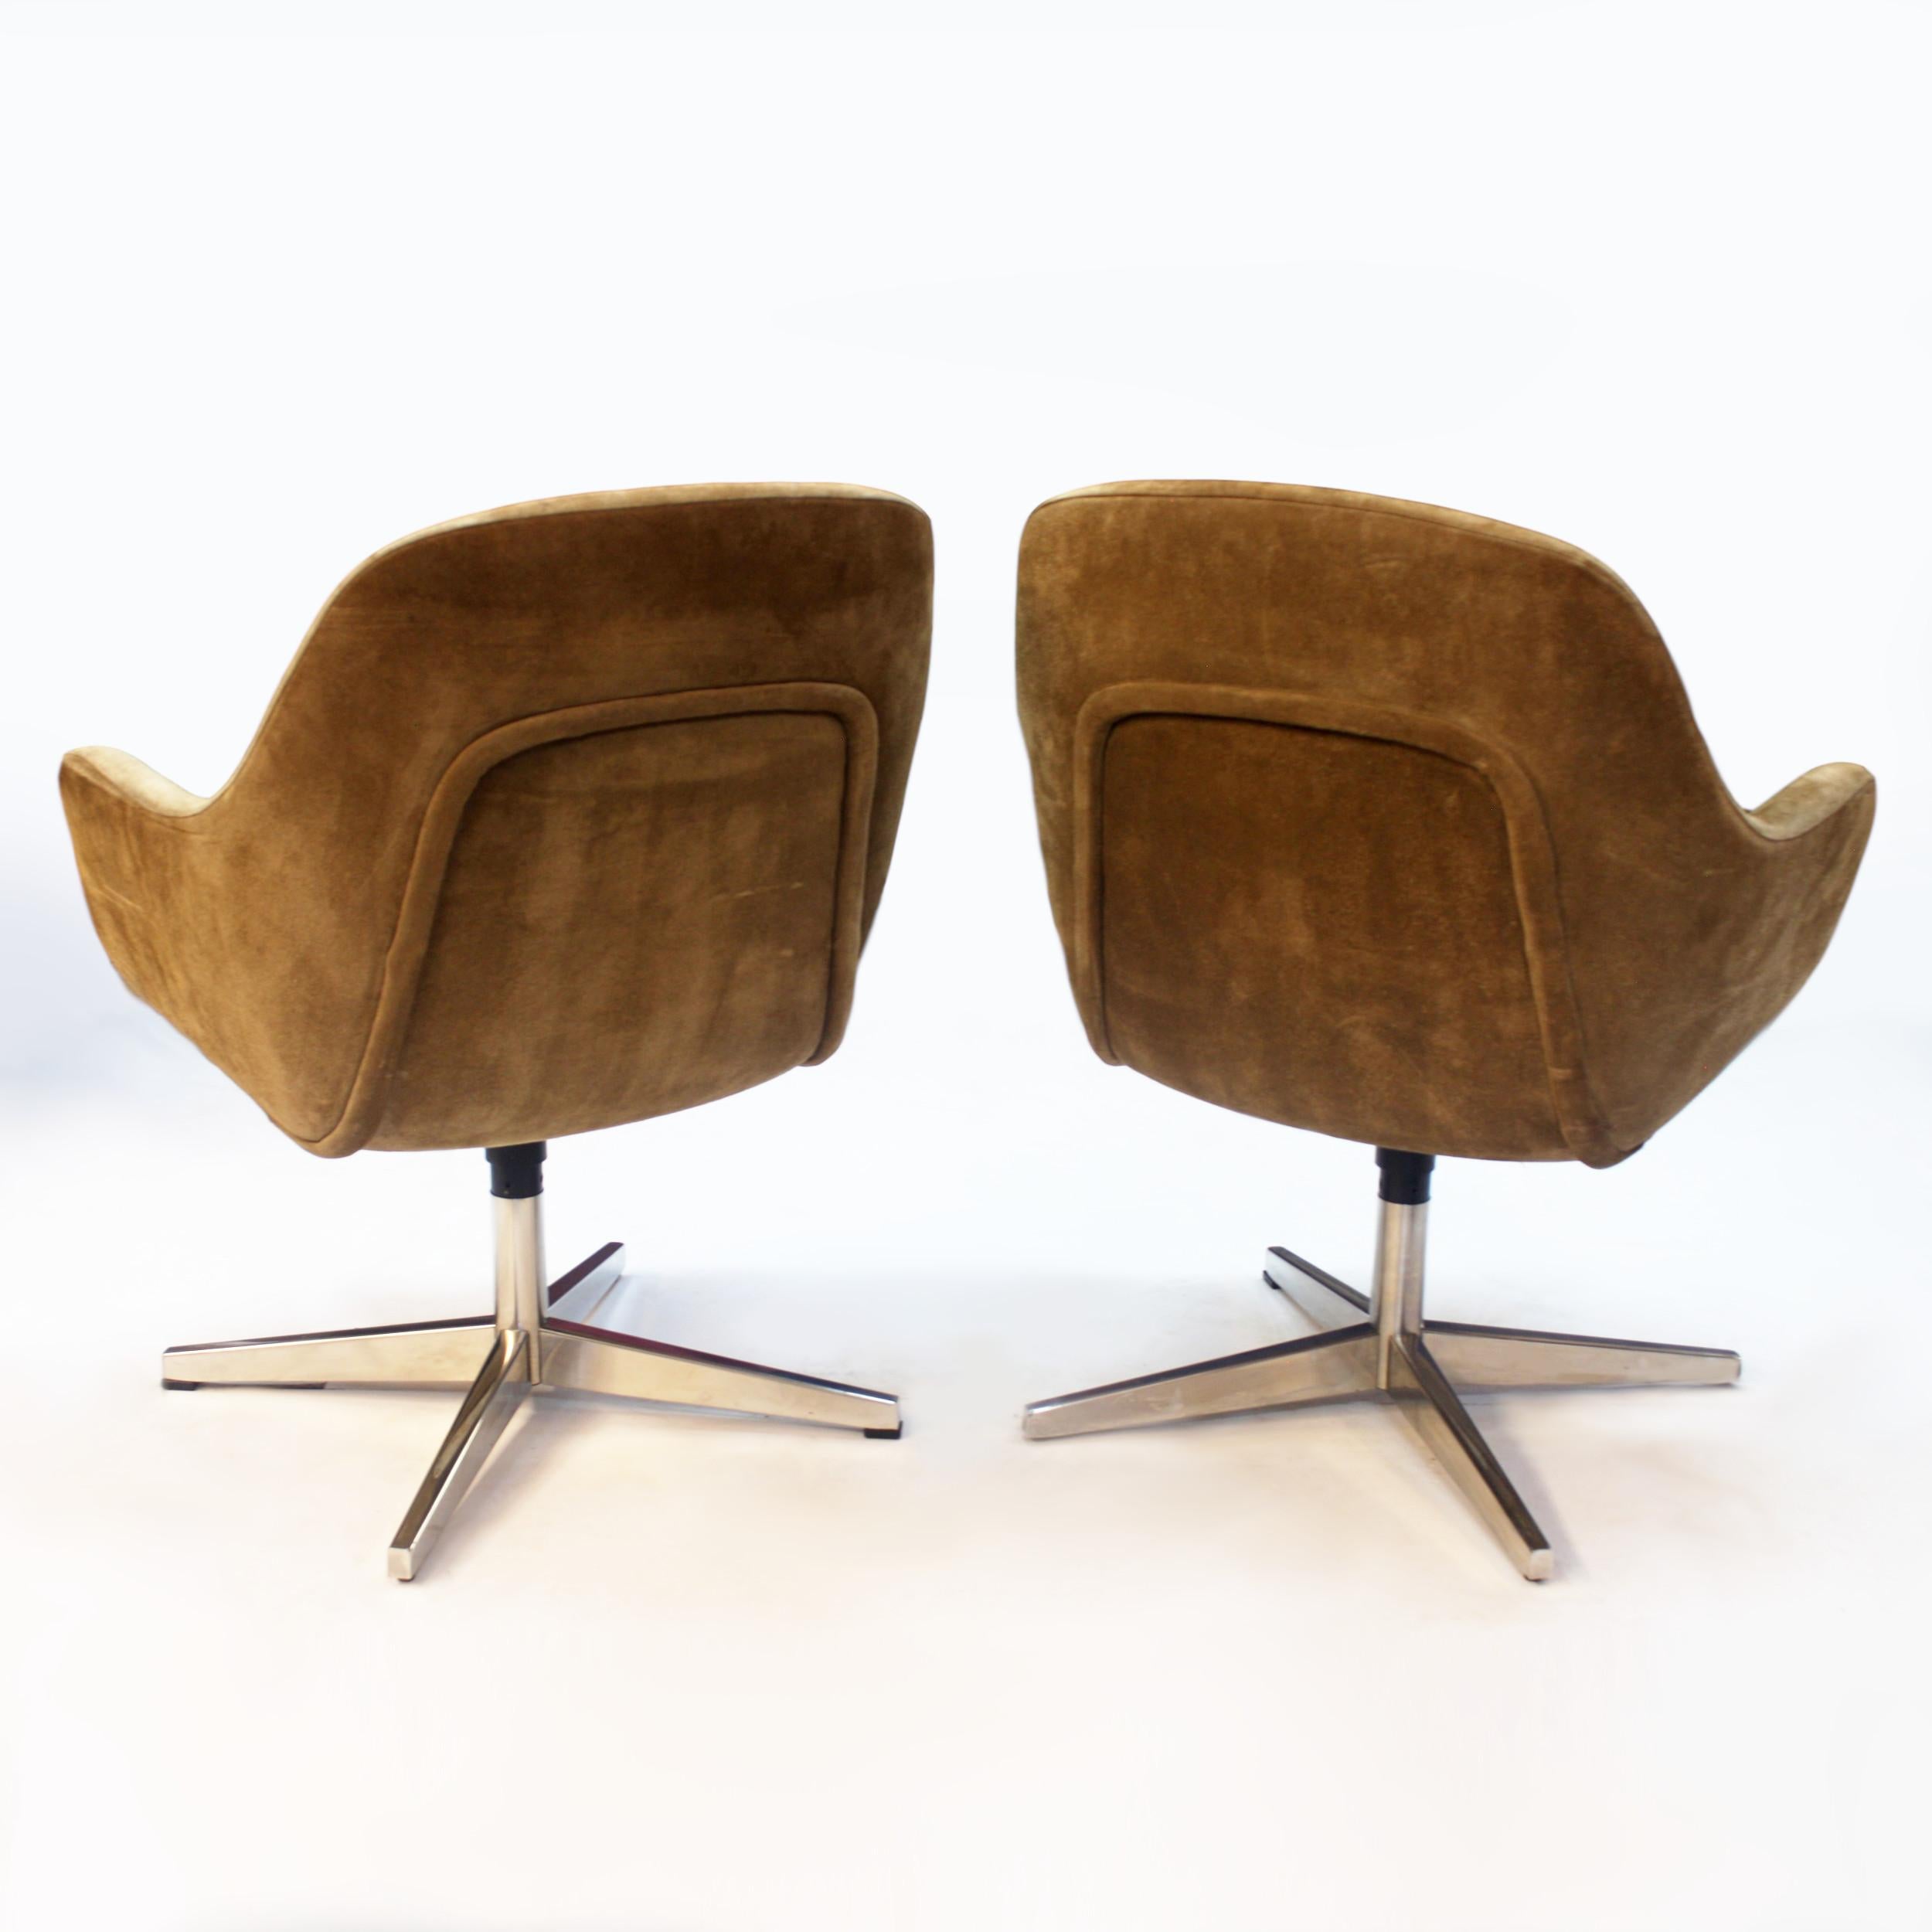 American Pair of Mid-Century Modern Suede Side / Guest Chairs by Max Pearson for Knoll